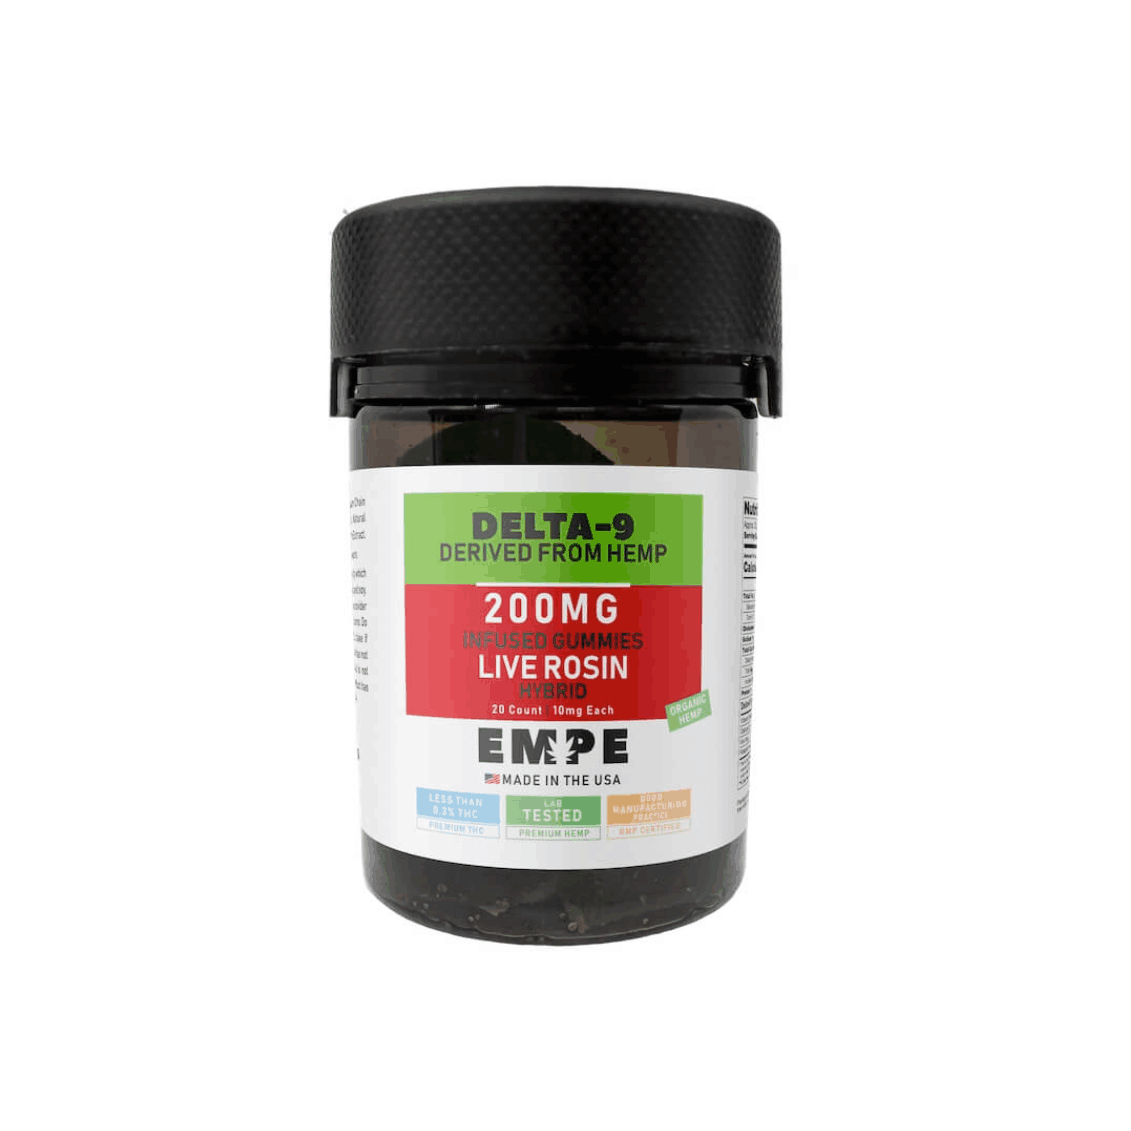 Delta-9 Gummies By Empe-USA-The Ultimate Review of Top Delta-9 Gummy Products